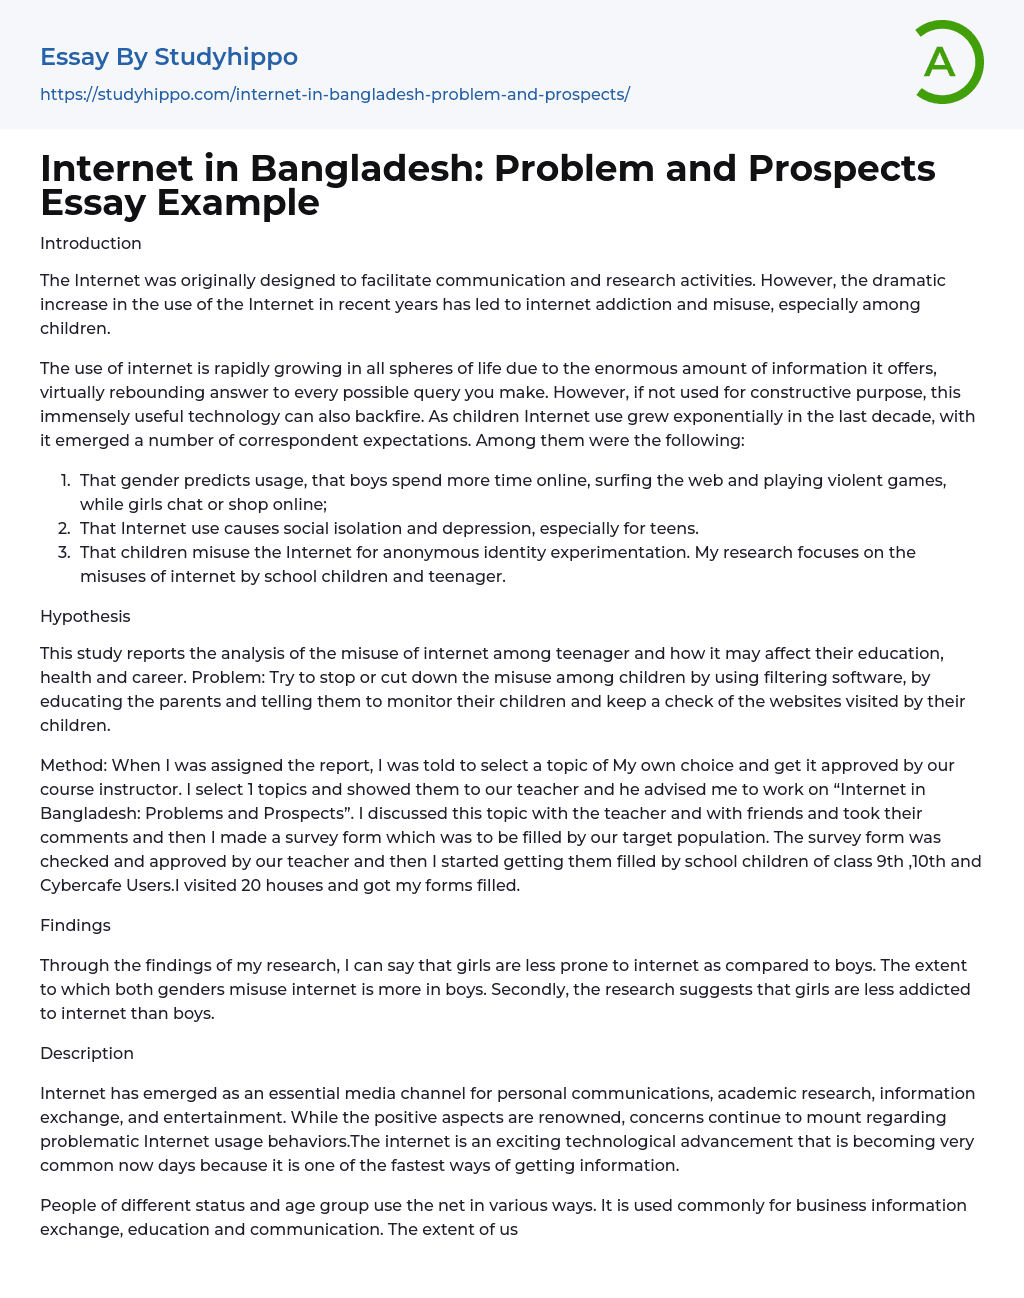 Internet in Bangladesh: Problem and Prospects Essay Example